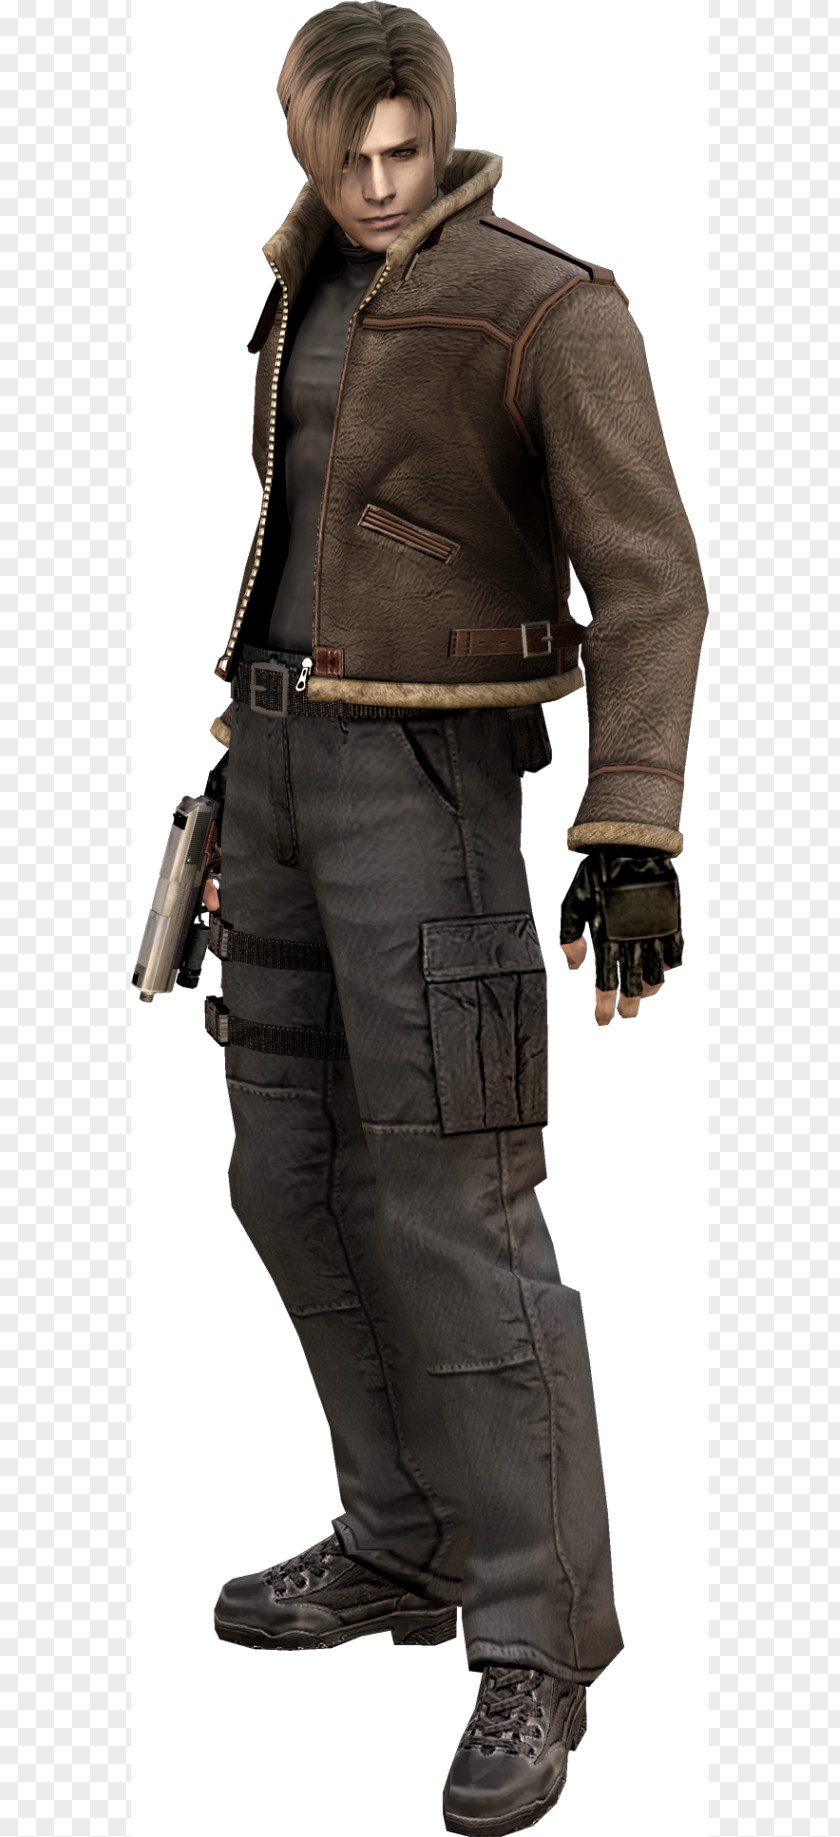 Jacket Leon S. Kennedy Resident Evil 4 2 6 PNG